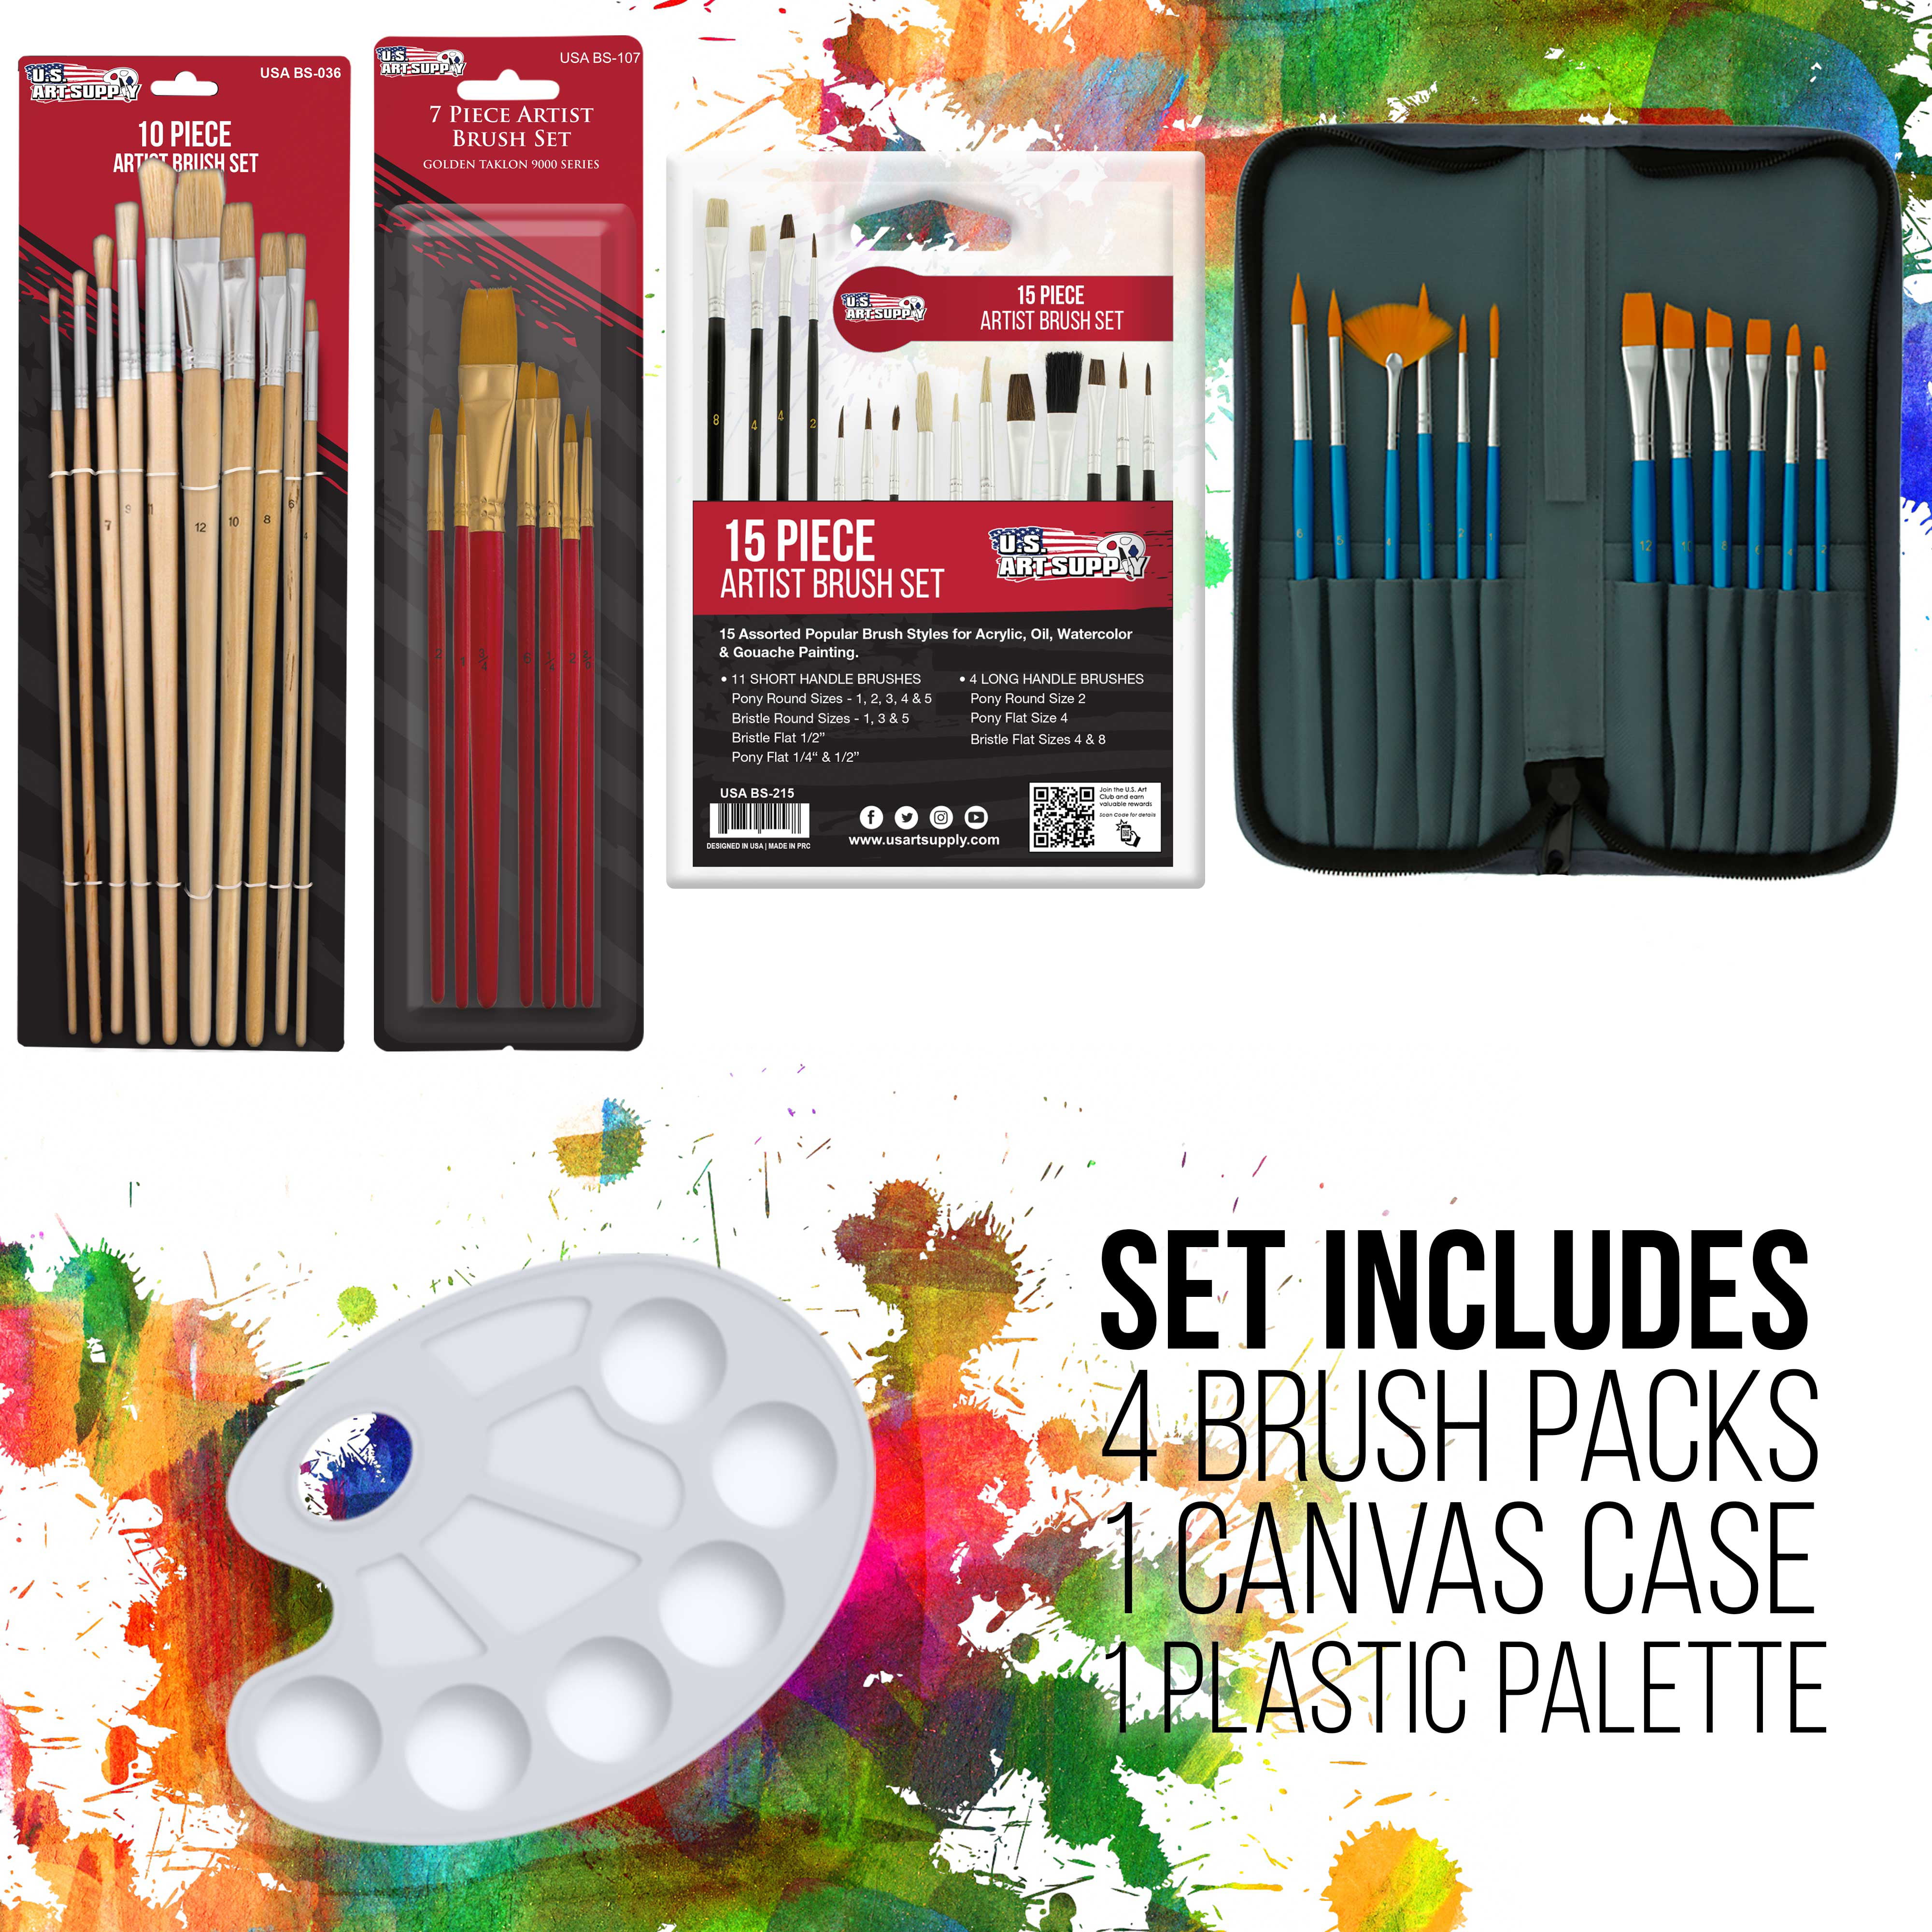  Large Deluxe Artist Painting Set, 139-Piece Professional Art  Paint Supplies Kit w/Aluminum Field & Wood Table Easel for Adults, Acrylic,  Oil & Watercolor Paints, Brushes, Canvases, Sketch Pads & More